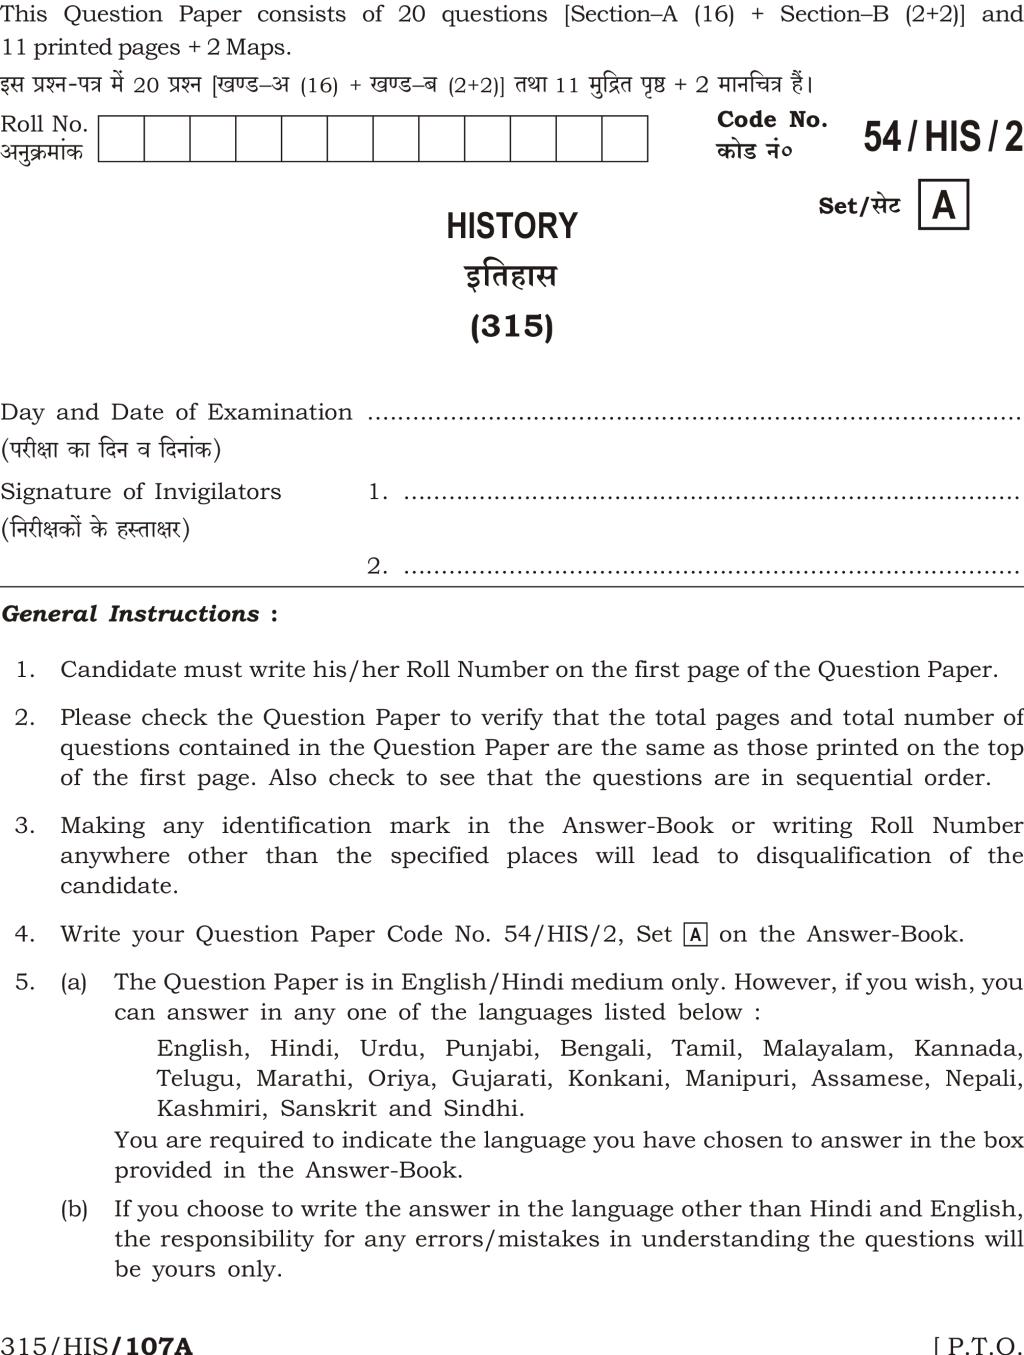 NIOS Class 12 Question Paper Apr 2017 - History - Page 1